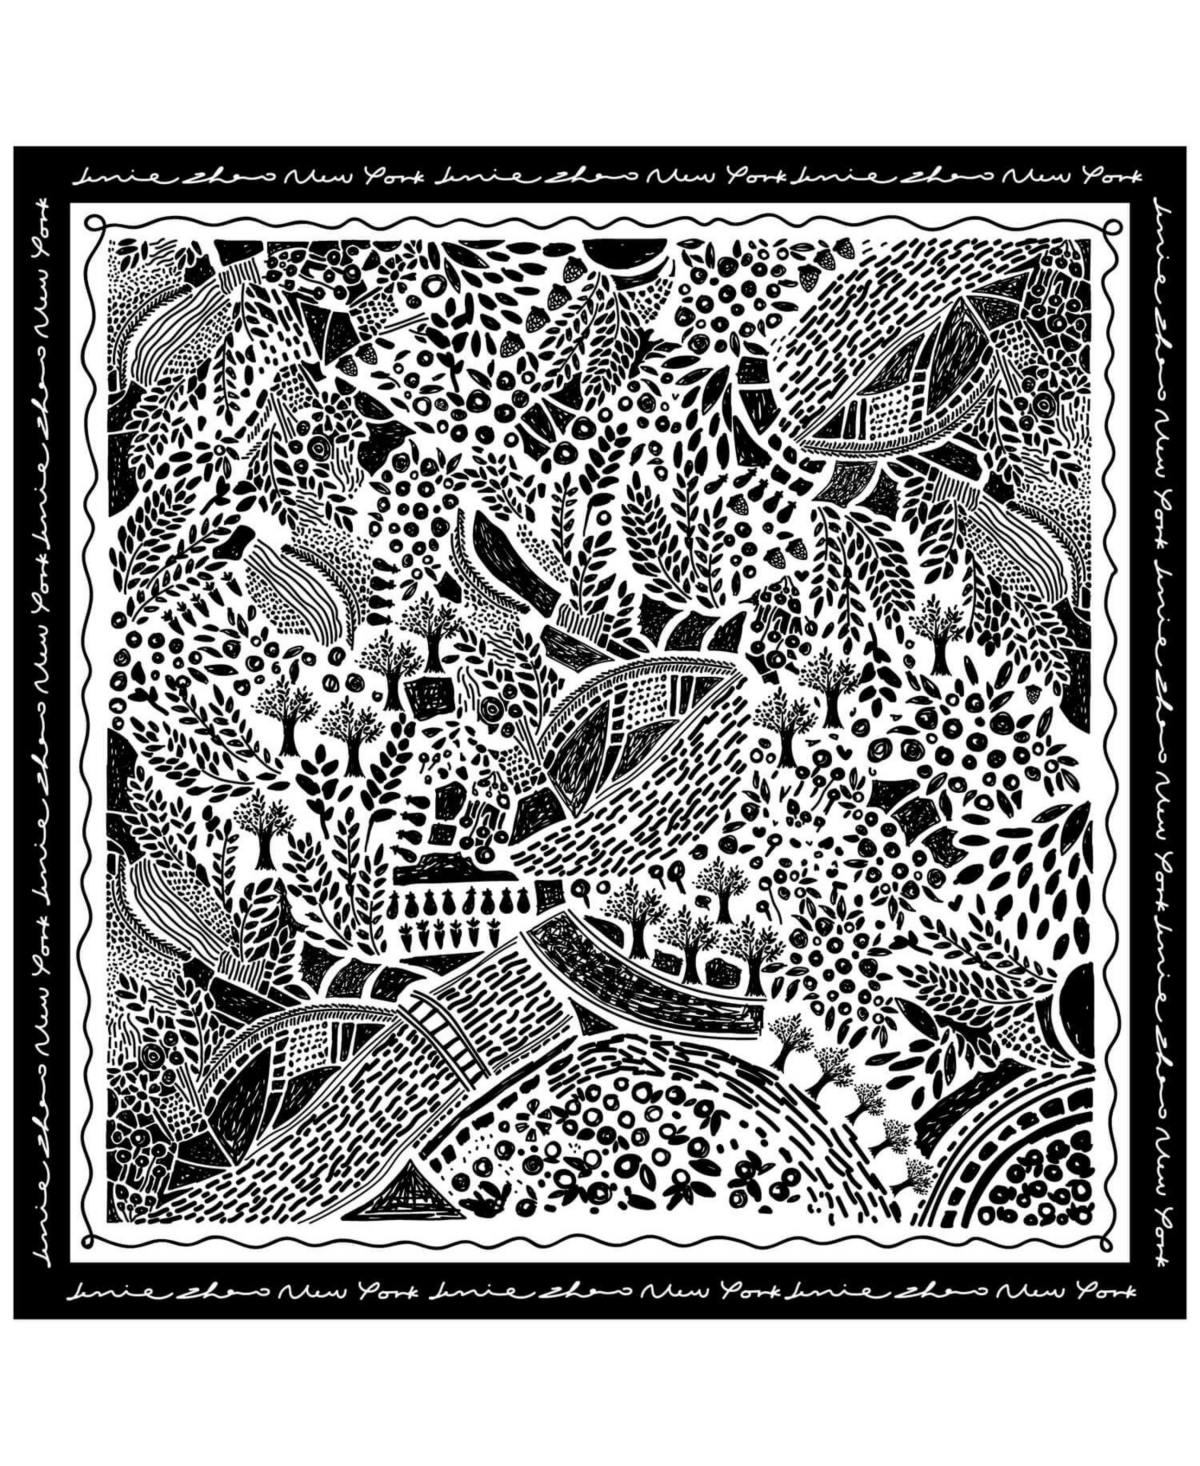 Double Sided Silk Scarf Of Black Garden - Black and white